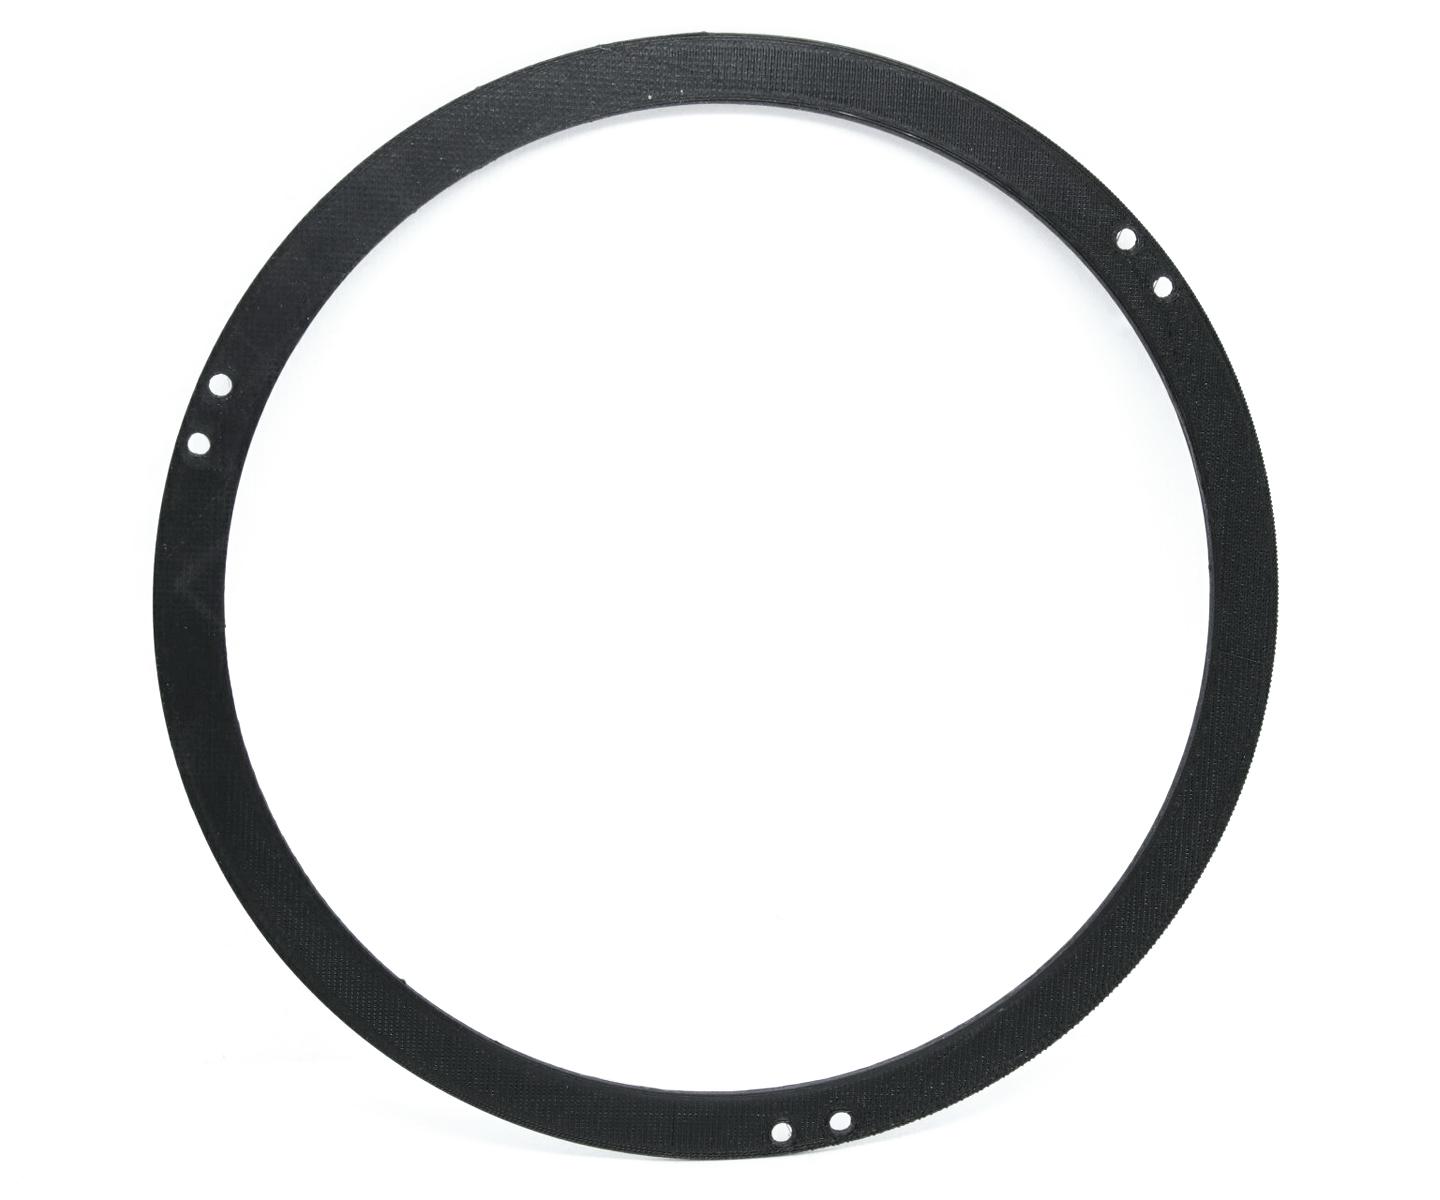   The baffle ring prevents or significantly reduces the "bloating" of stars in deep sky shots. [EN]  